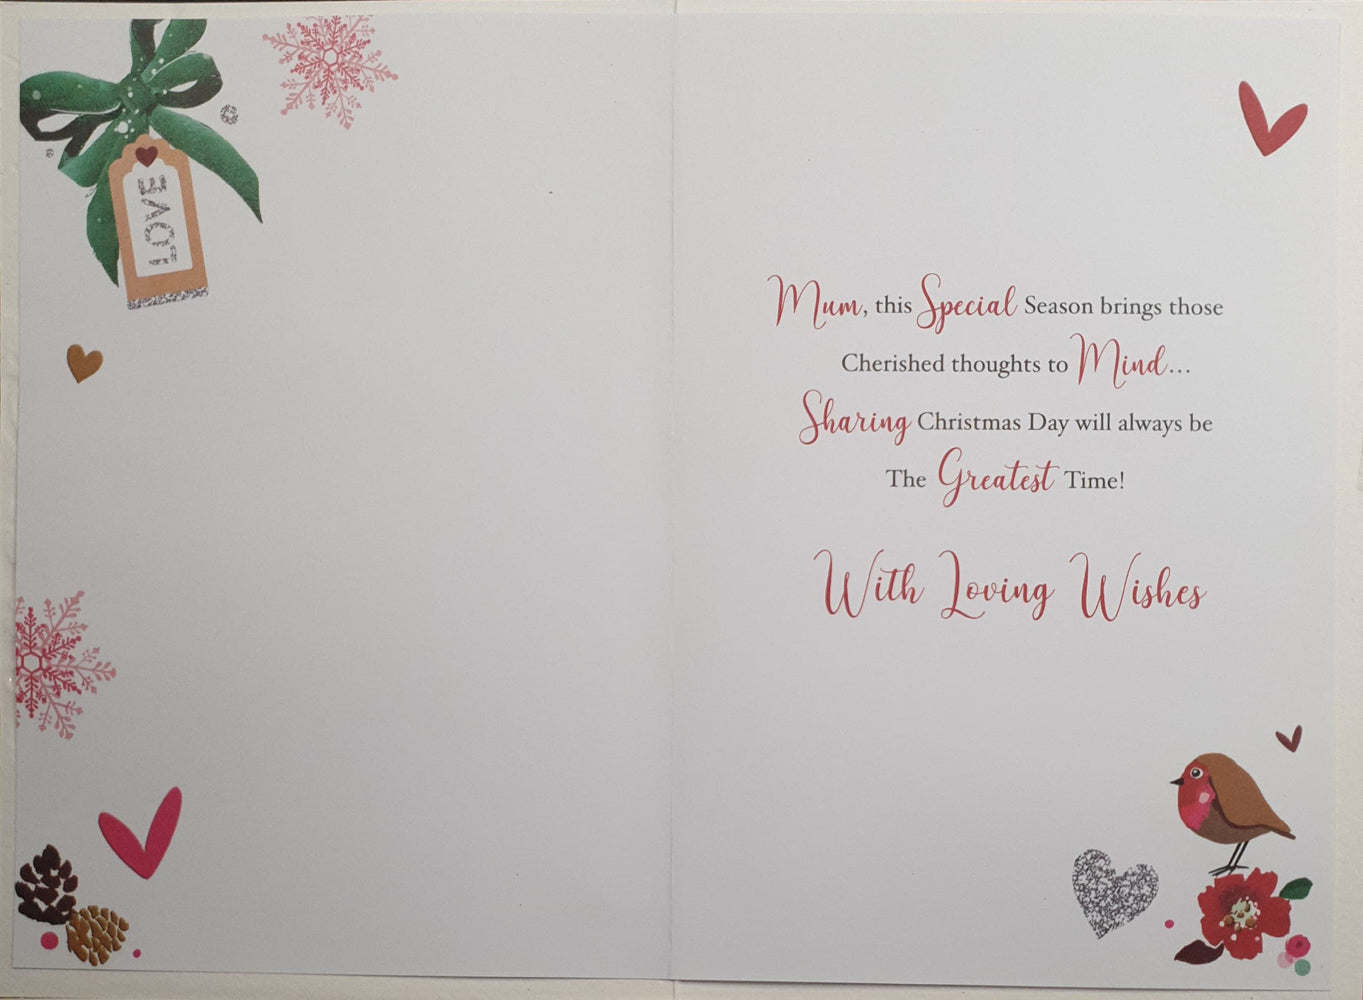 Special Mum Christmas Card - Hearts & Flowers With Birds